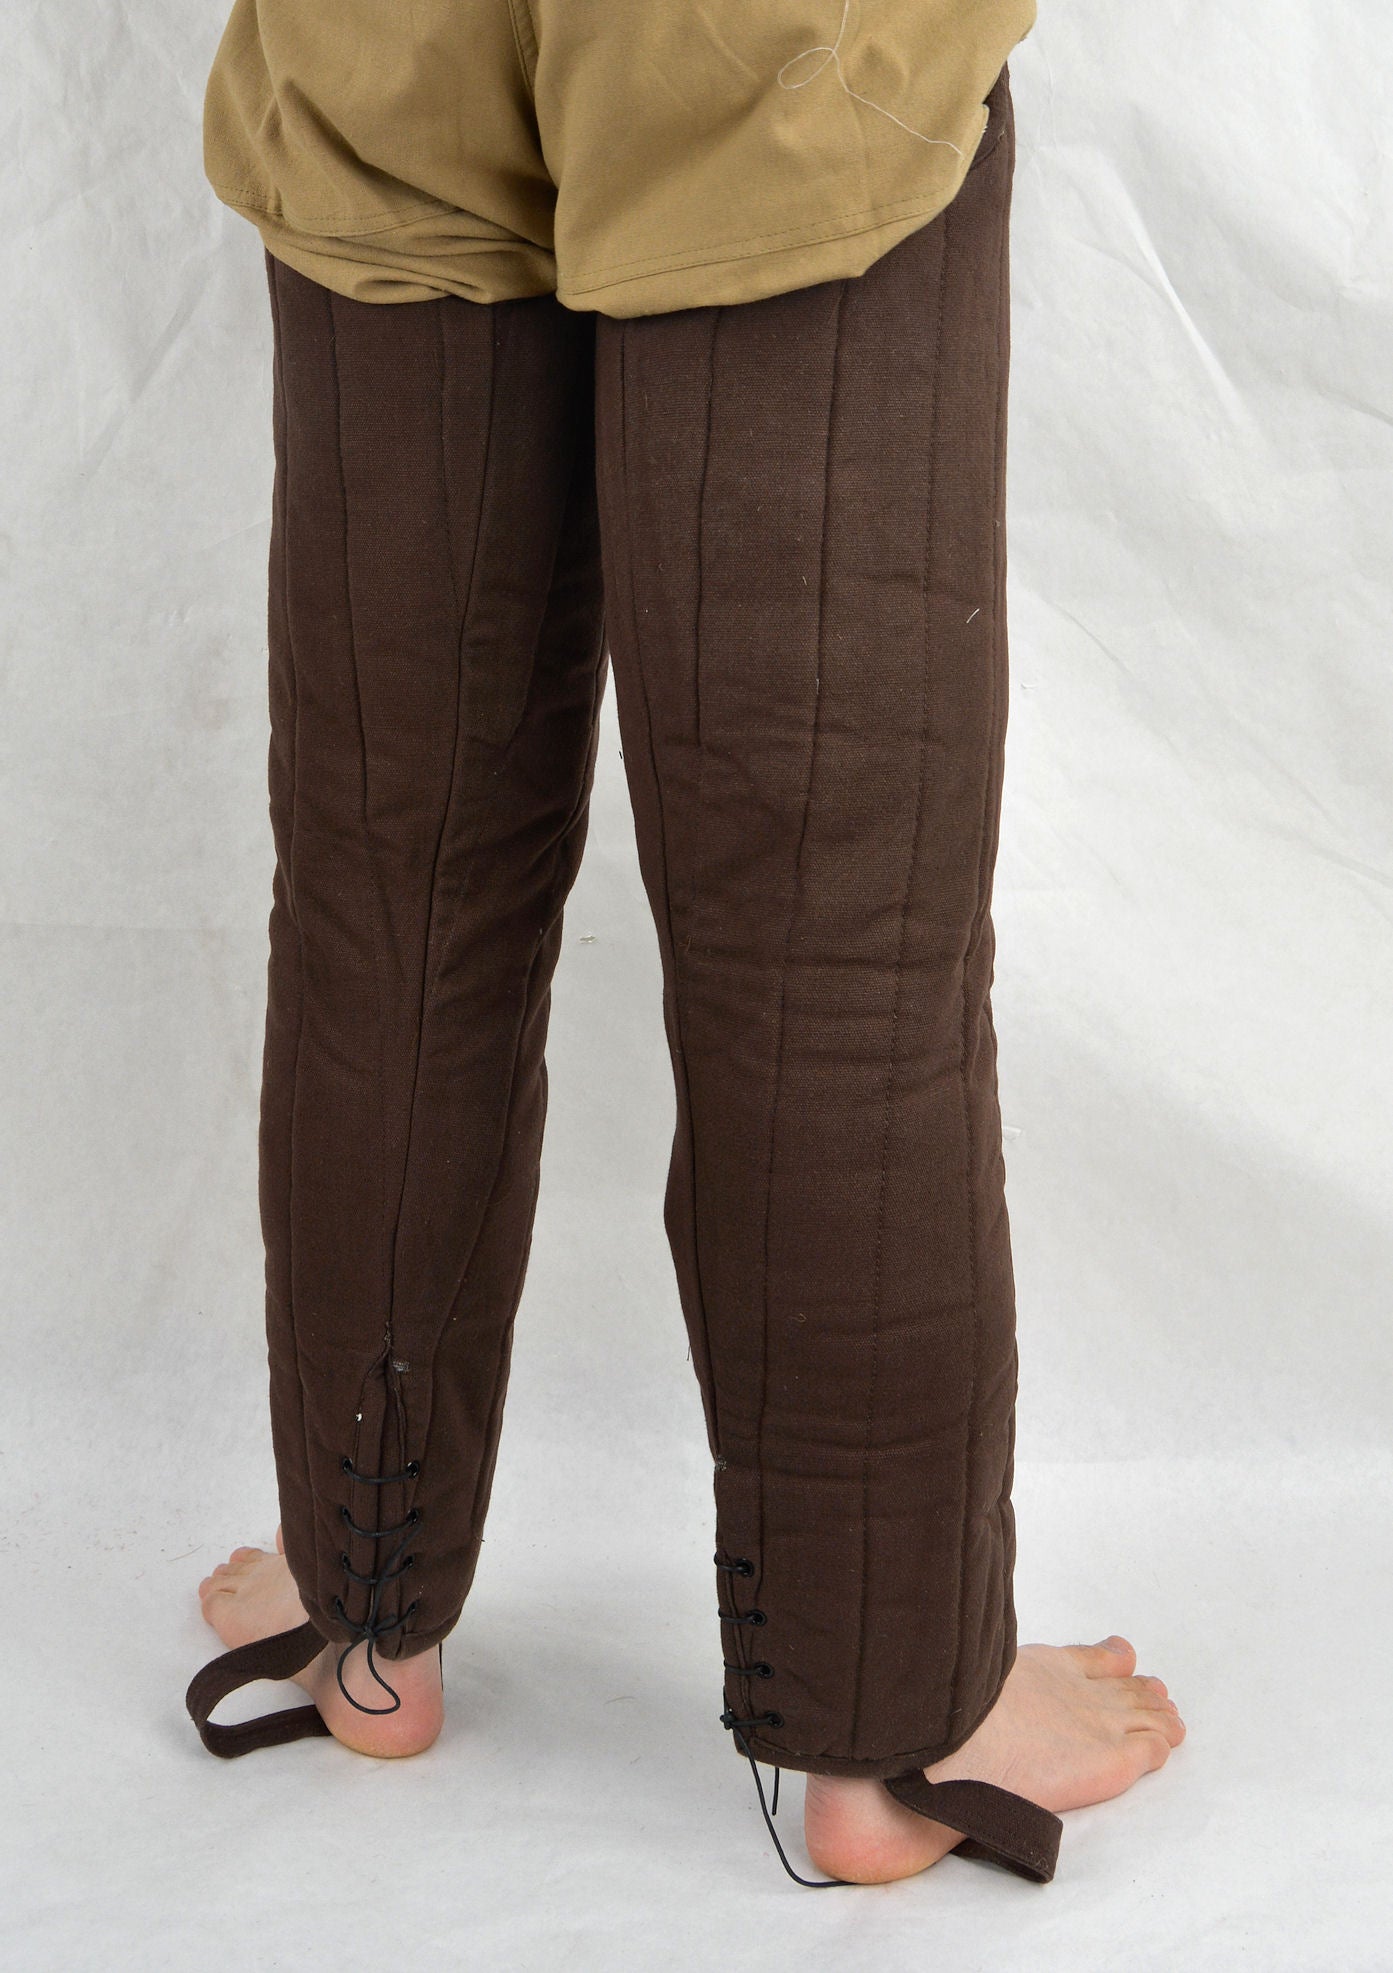 Padded Chausses - Brown